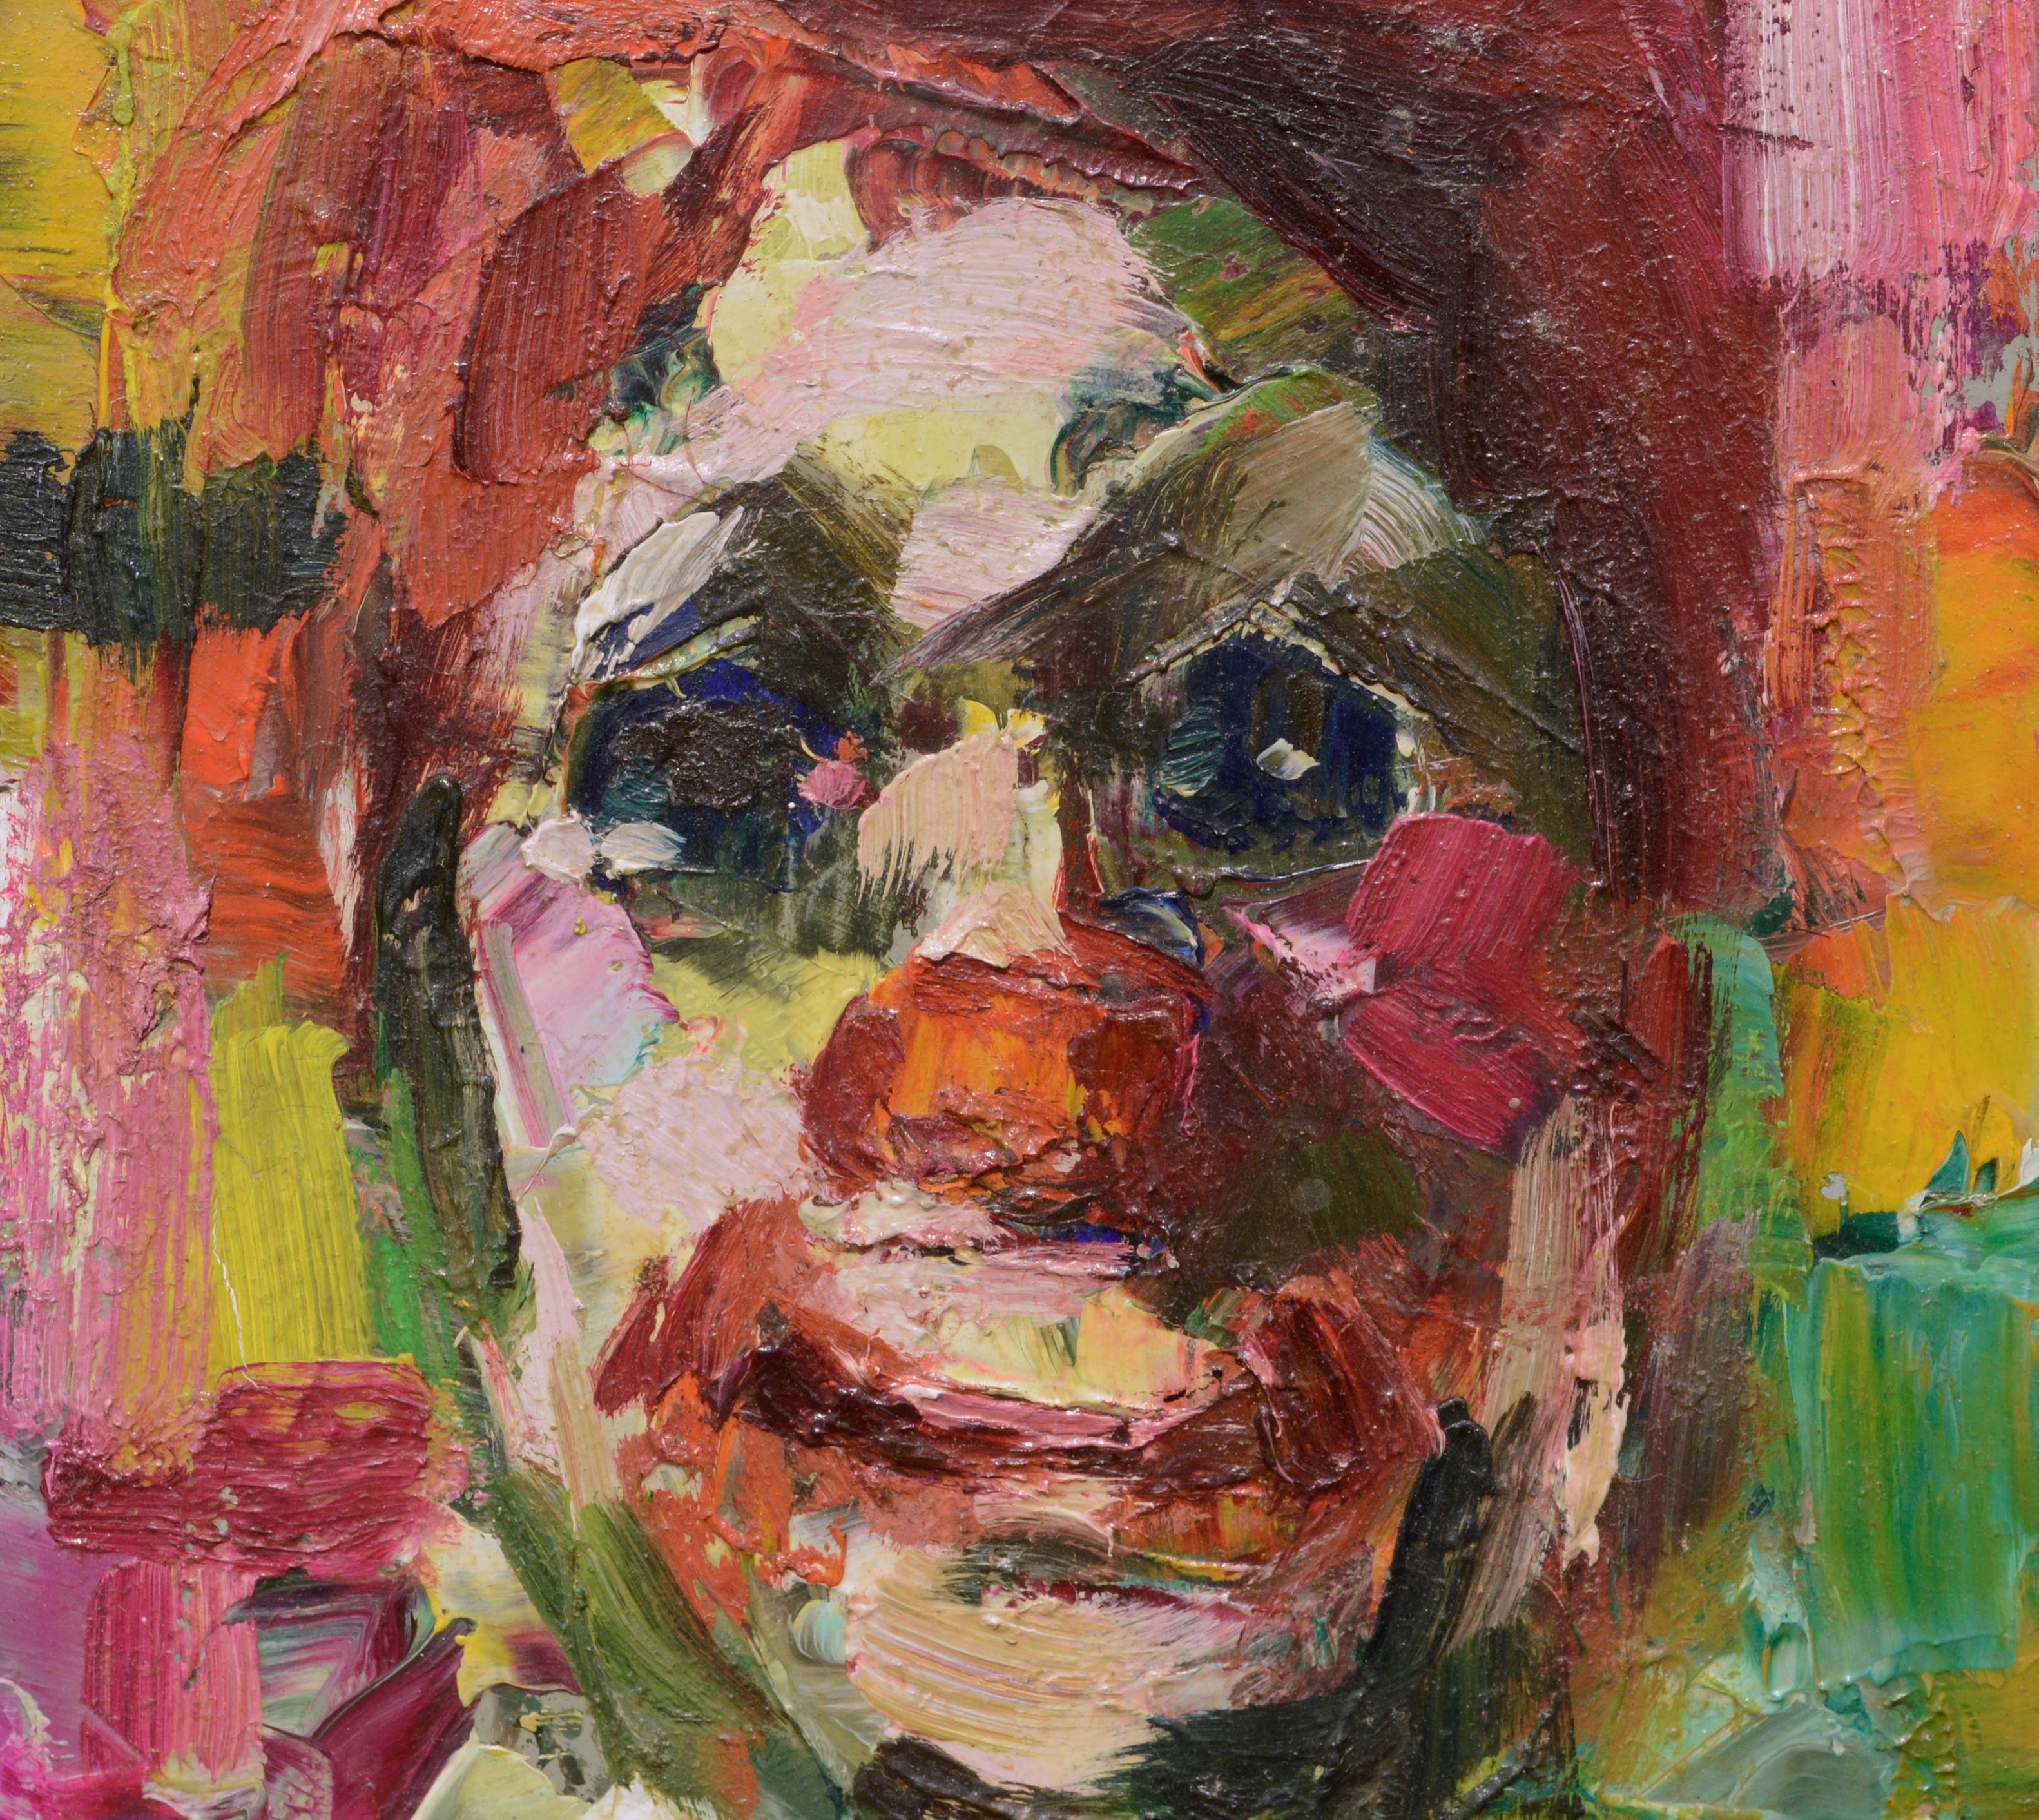 Diminutive Mid Century Expressionist Clown Portrait #1 - Painting by Marjorie May Blake